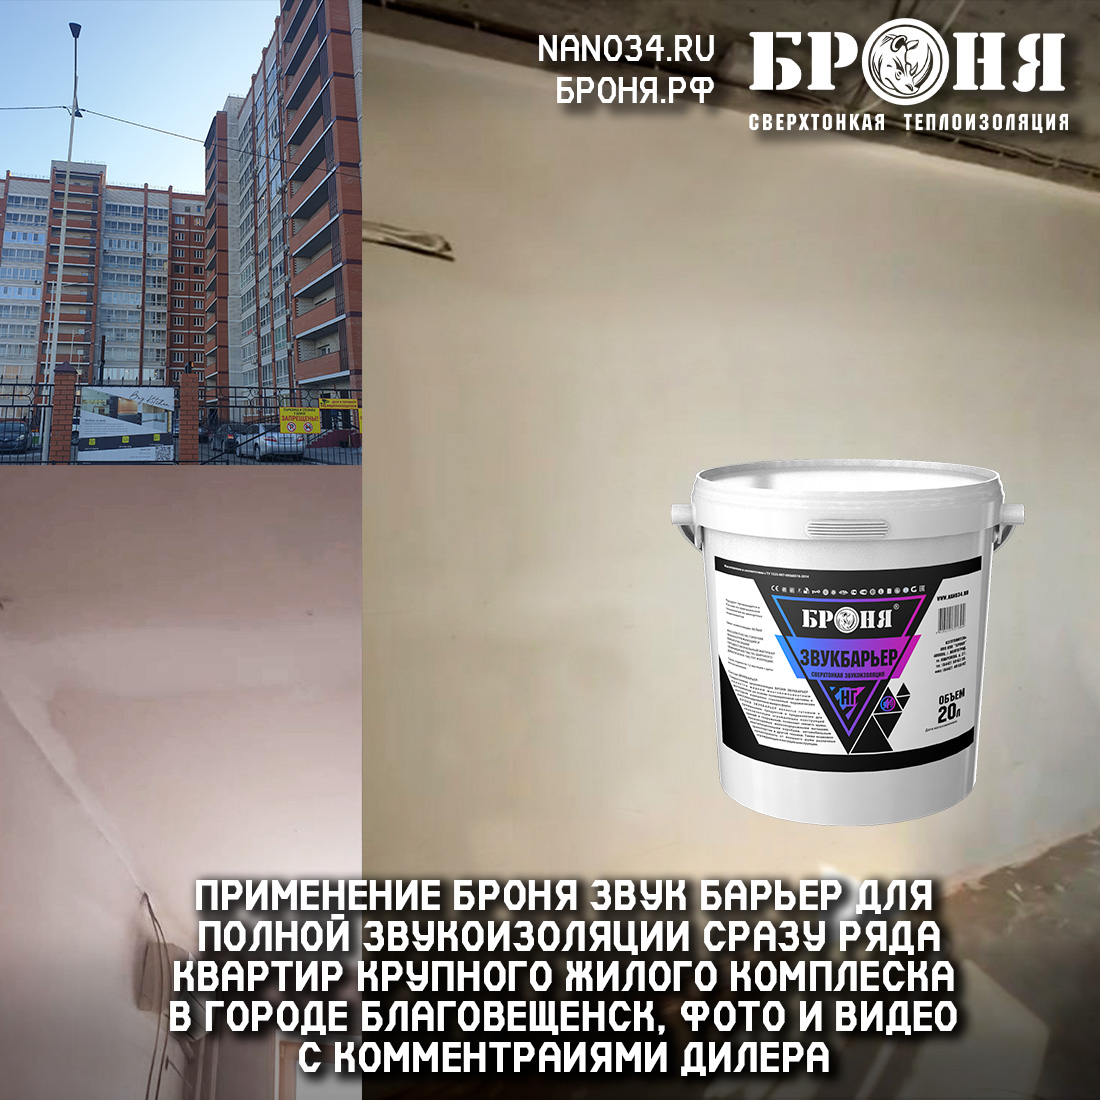 The application of Bronya Sound Barrier for complete sound insulation of a number of apartments in a large residential complex in the city of Blagoveshchensk (photos and videos with detailed comments from the dealer)